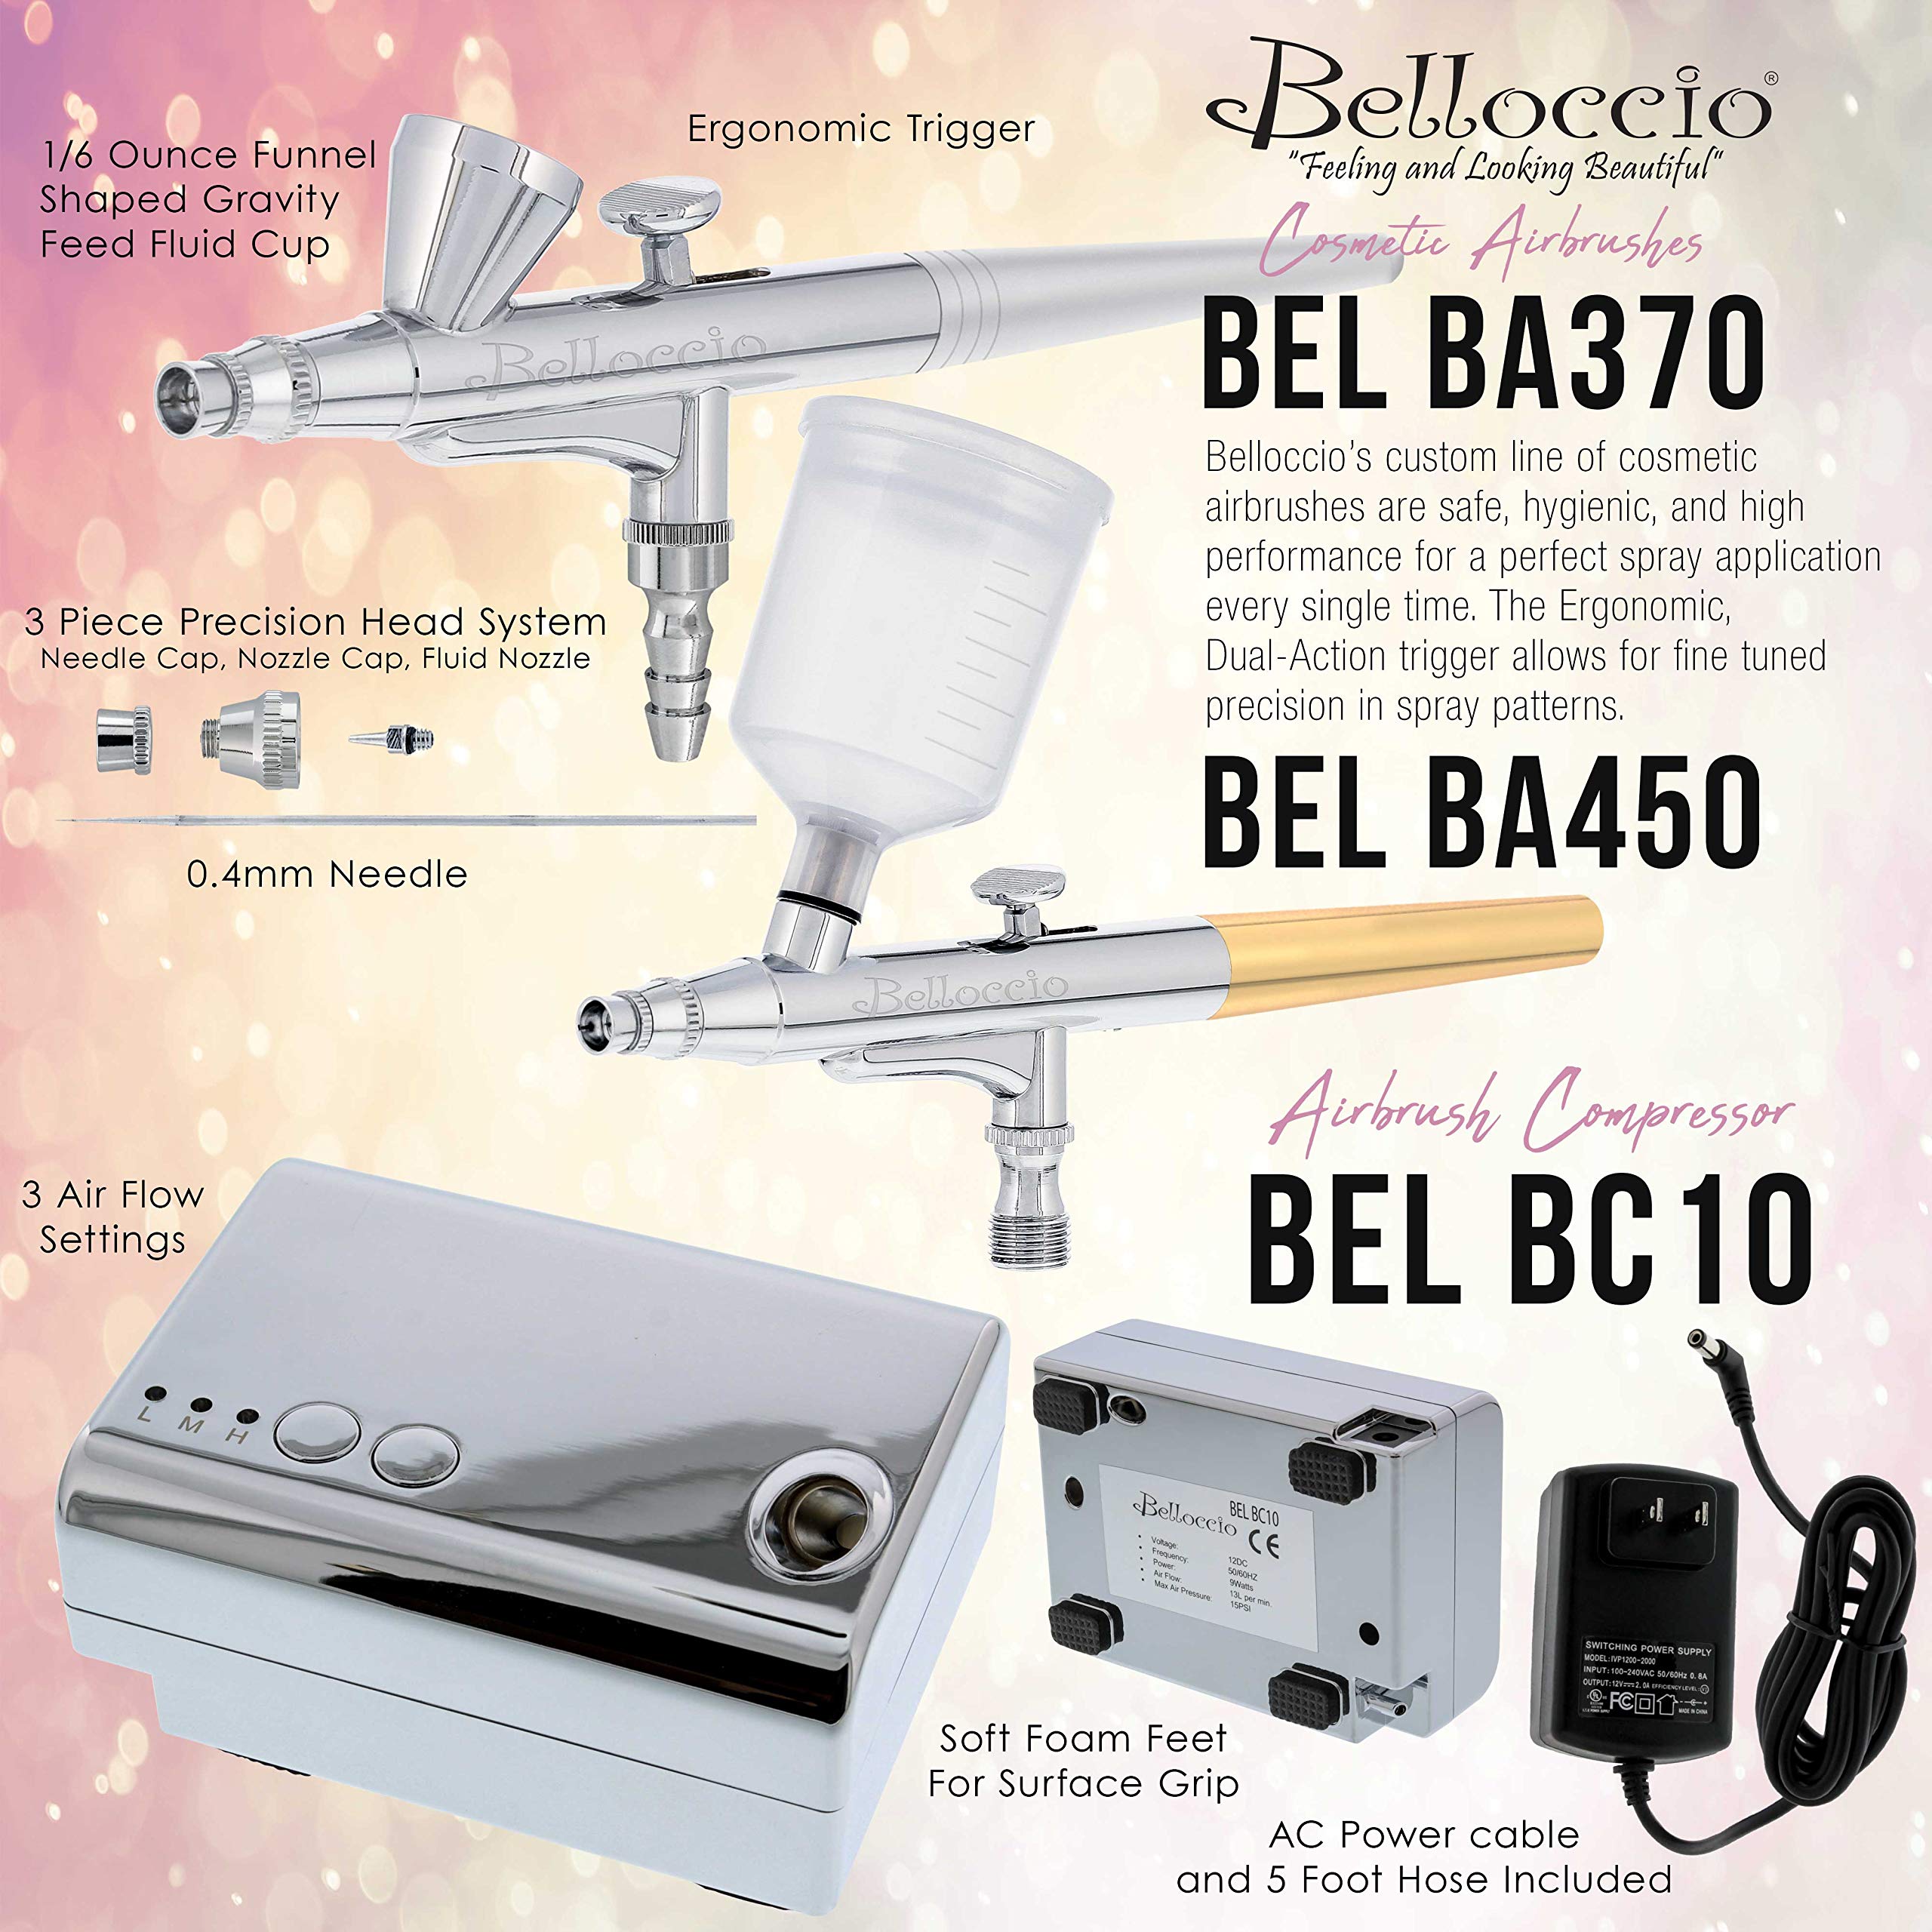 Belloccio Makeup and Tanning Airbrush System with MEDIUM Foundation and Blush Set